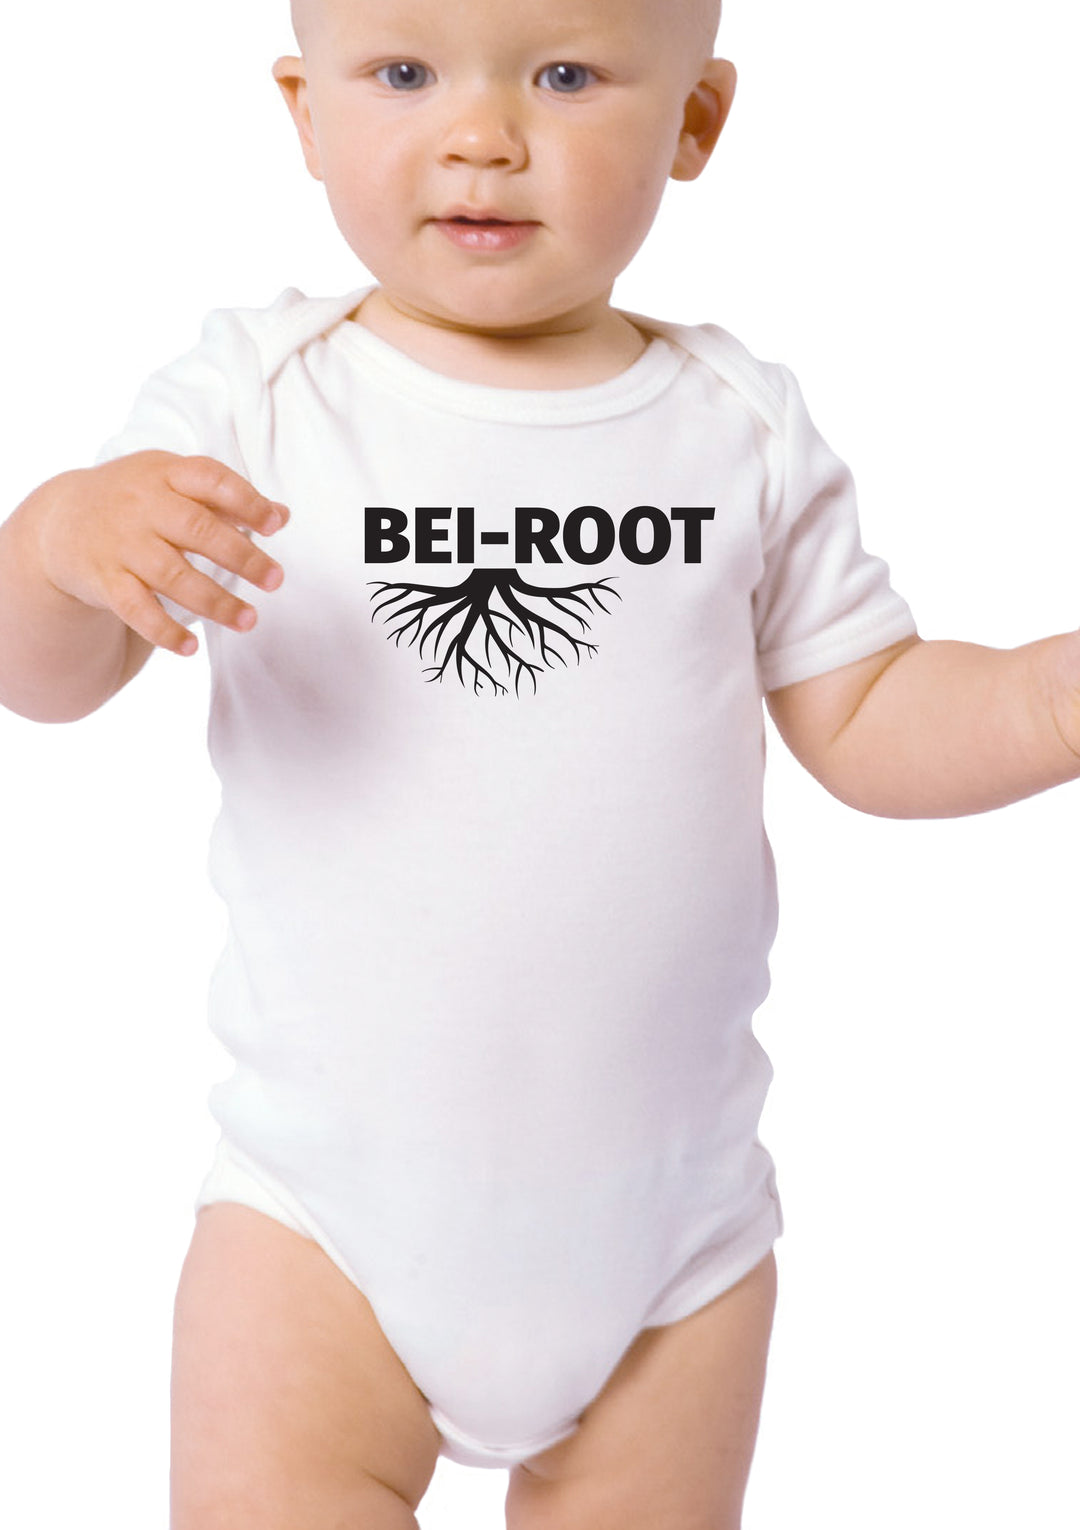 Shop The Latest Collection Of Bei-Root B Kids Body In Lebanon